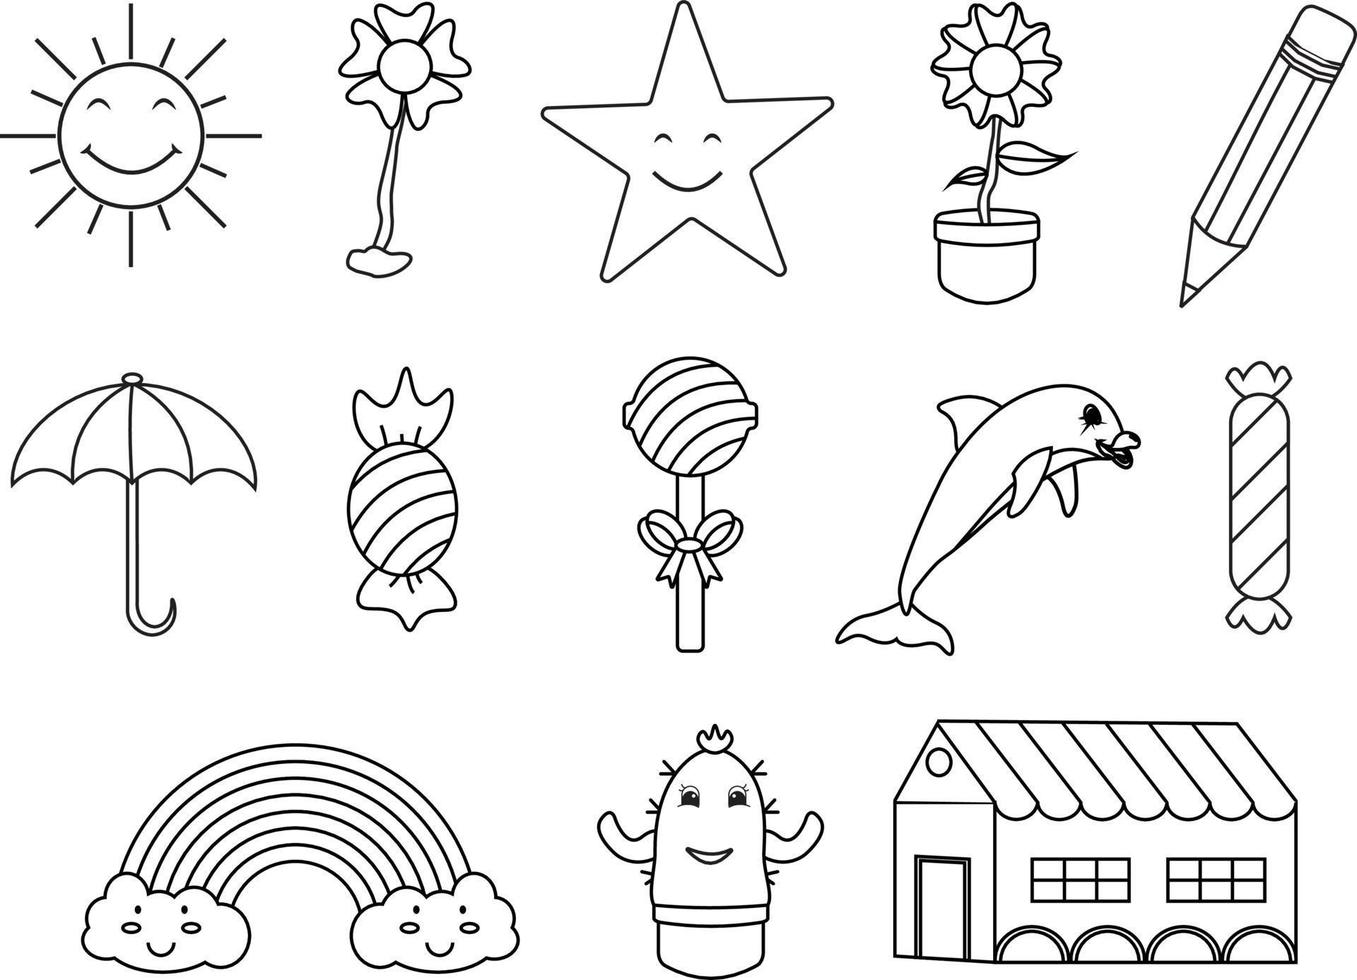 Cute things coloring page different isolated element on the white background. Cute outline illustration for kids with Sun, Flower, Stars, Pencil, Umbrella, Candy, Lollipop, Fish, Rainbow, Cactus. vector